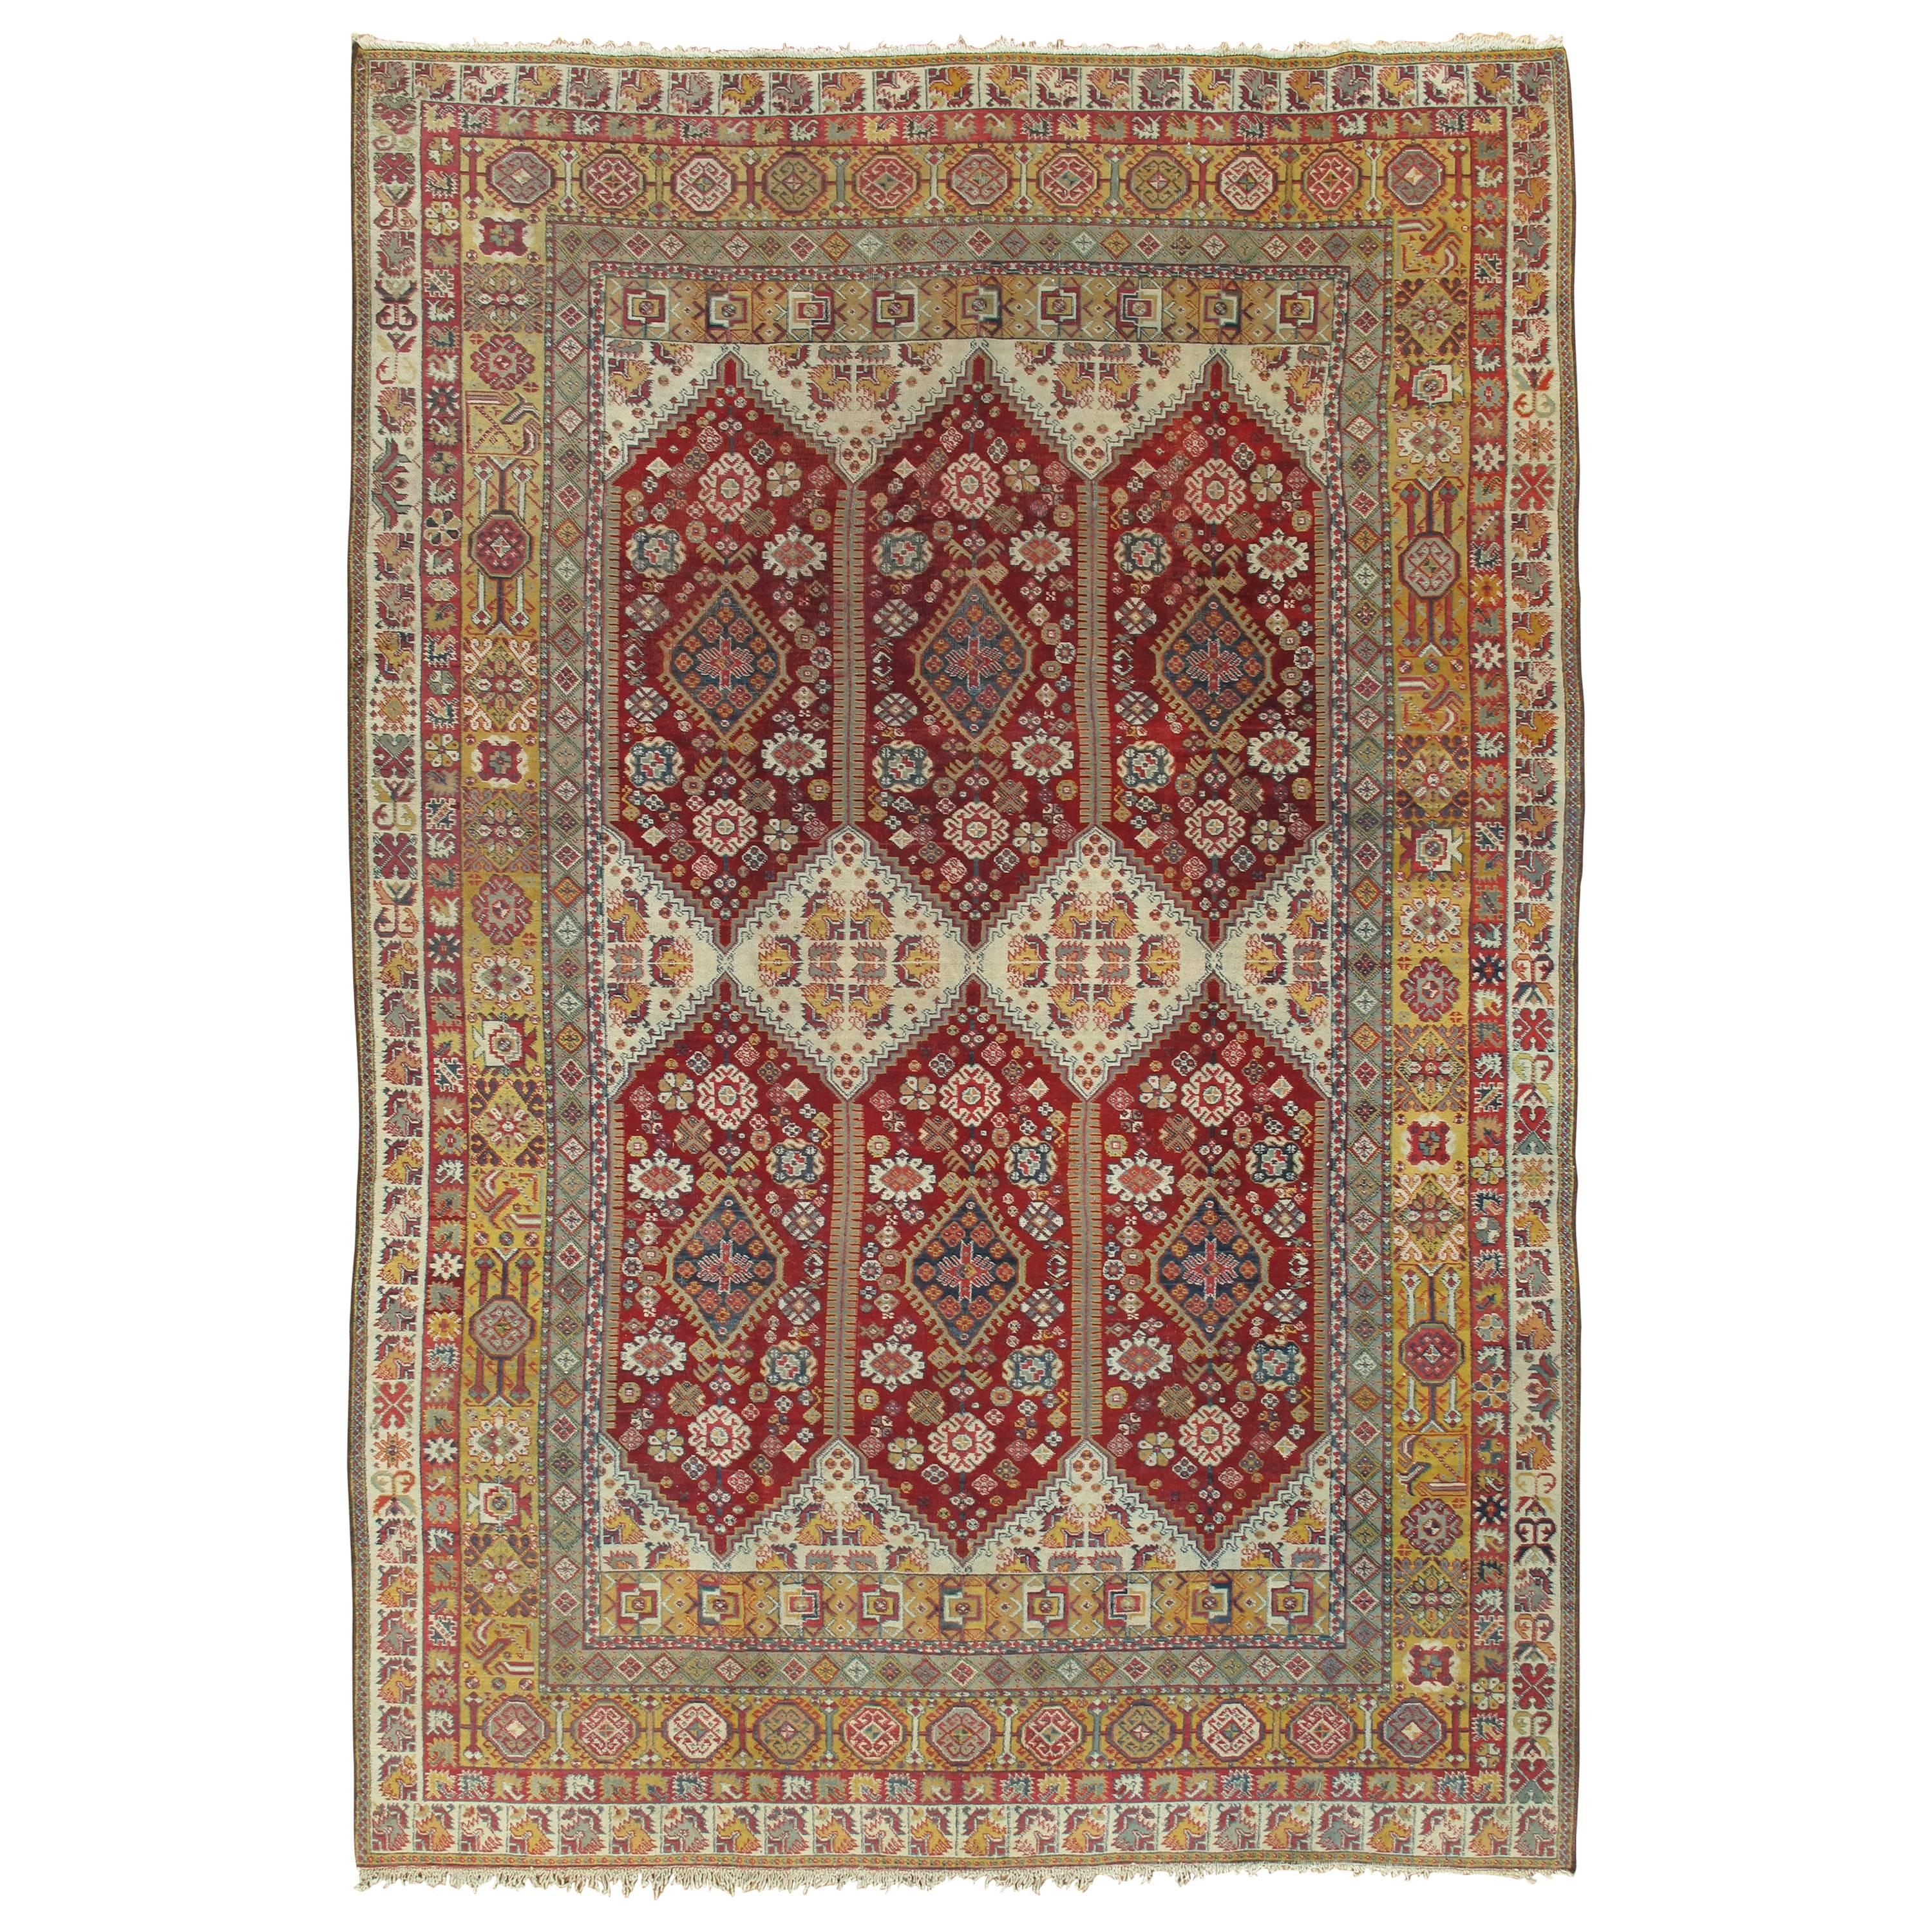 Antique Indian Agra Carpet, Indian Rugs, Oriental Rugs, Red, Gold, 5'10" x 9'8"